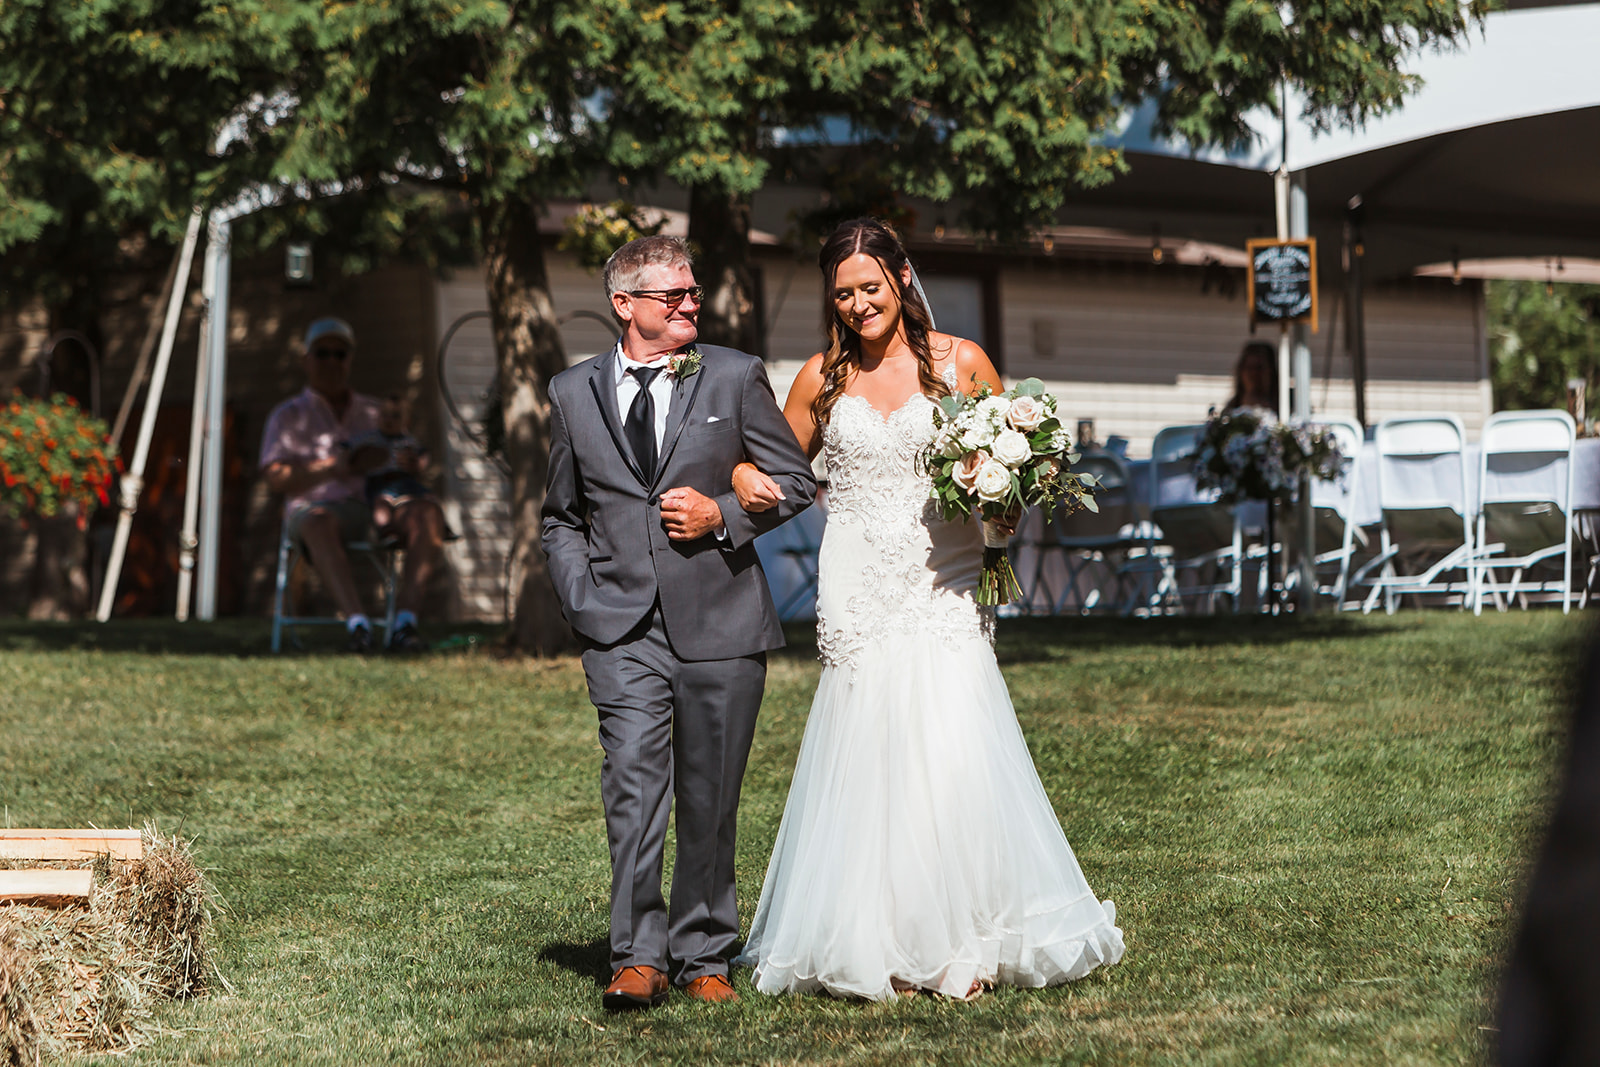 A backyard ceremony from a summer wedding in Minnesota